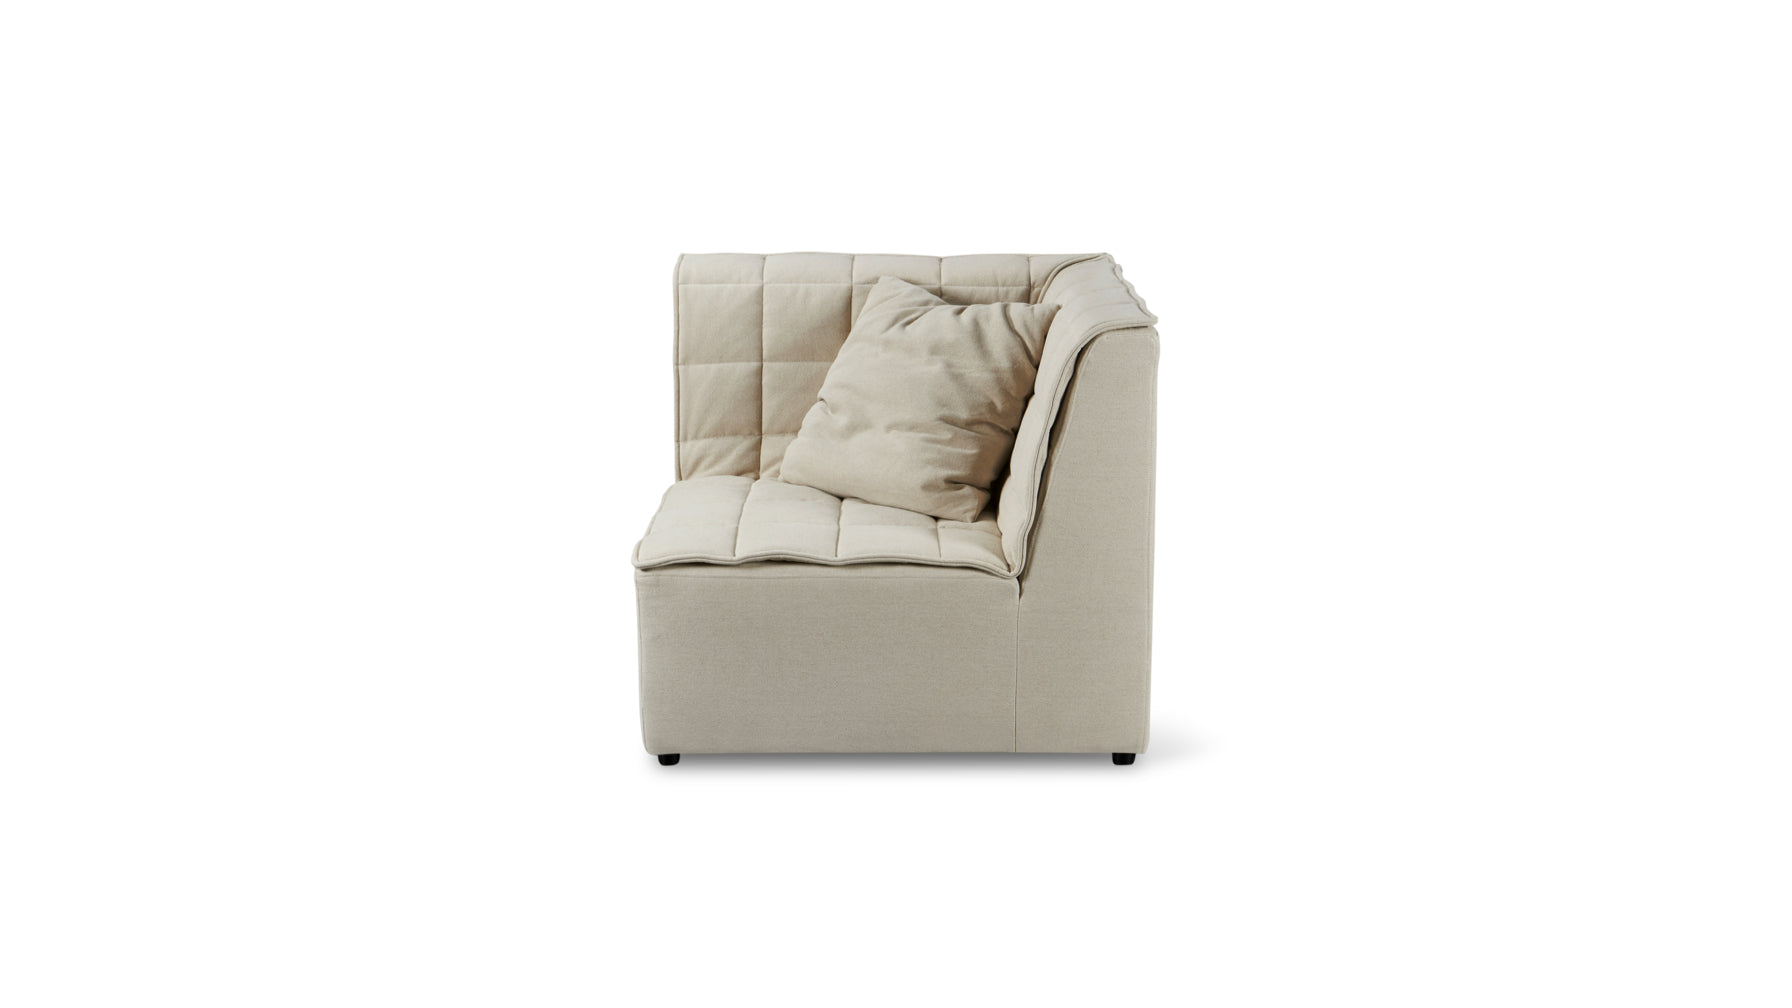 Quilt Corner Chair, Fawn - Image 1